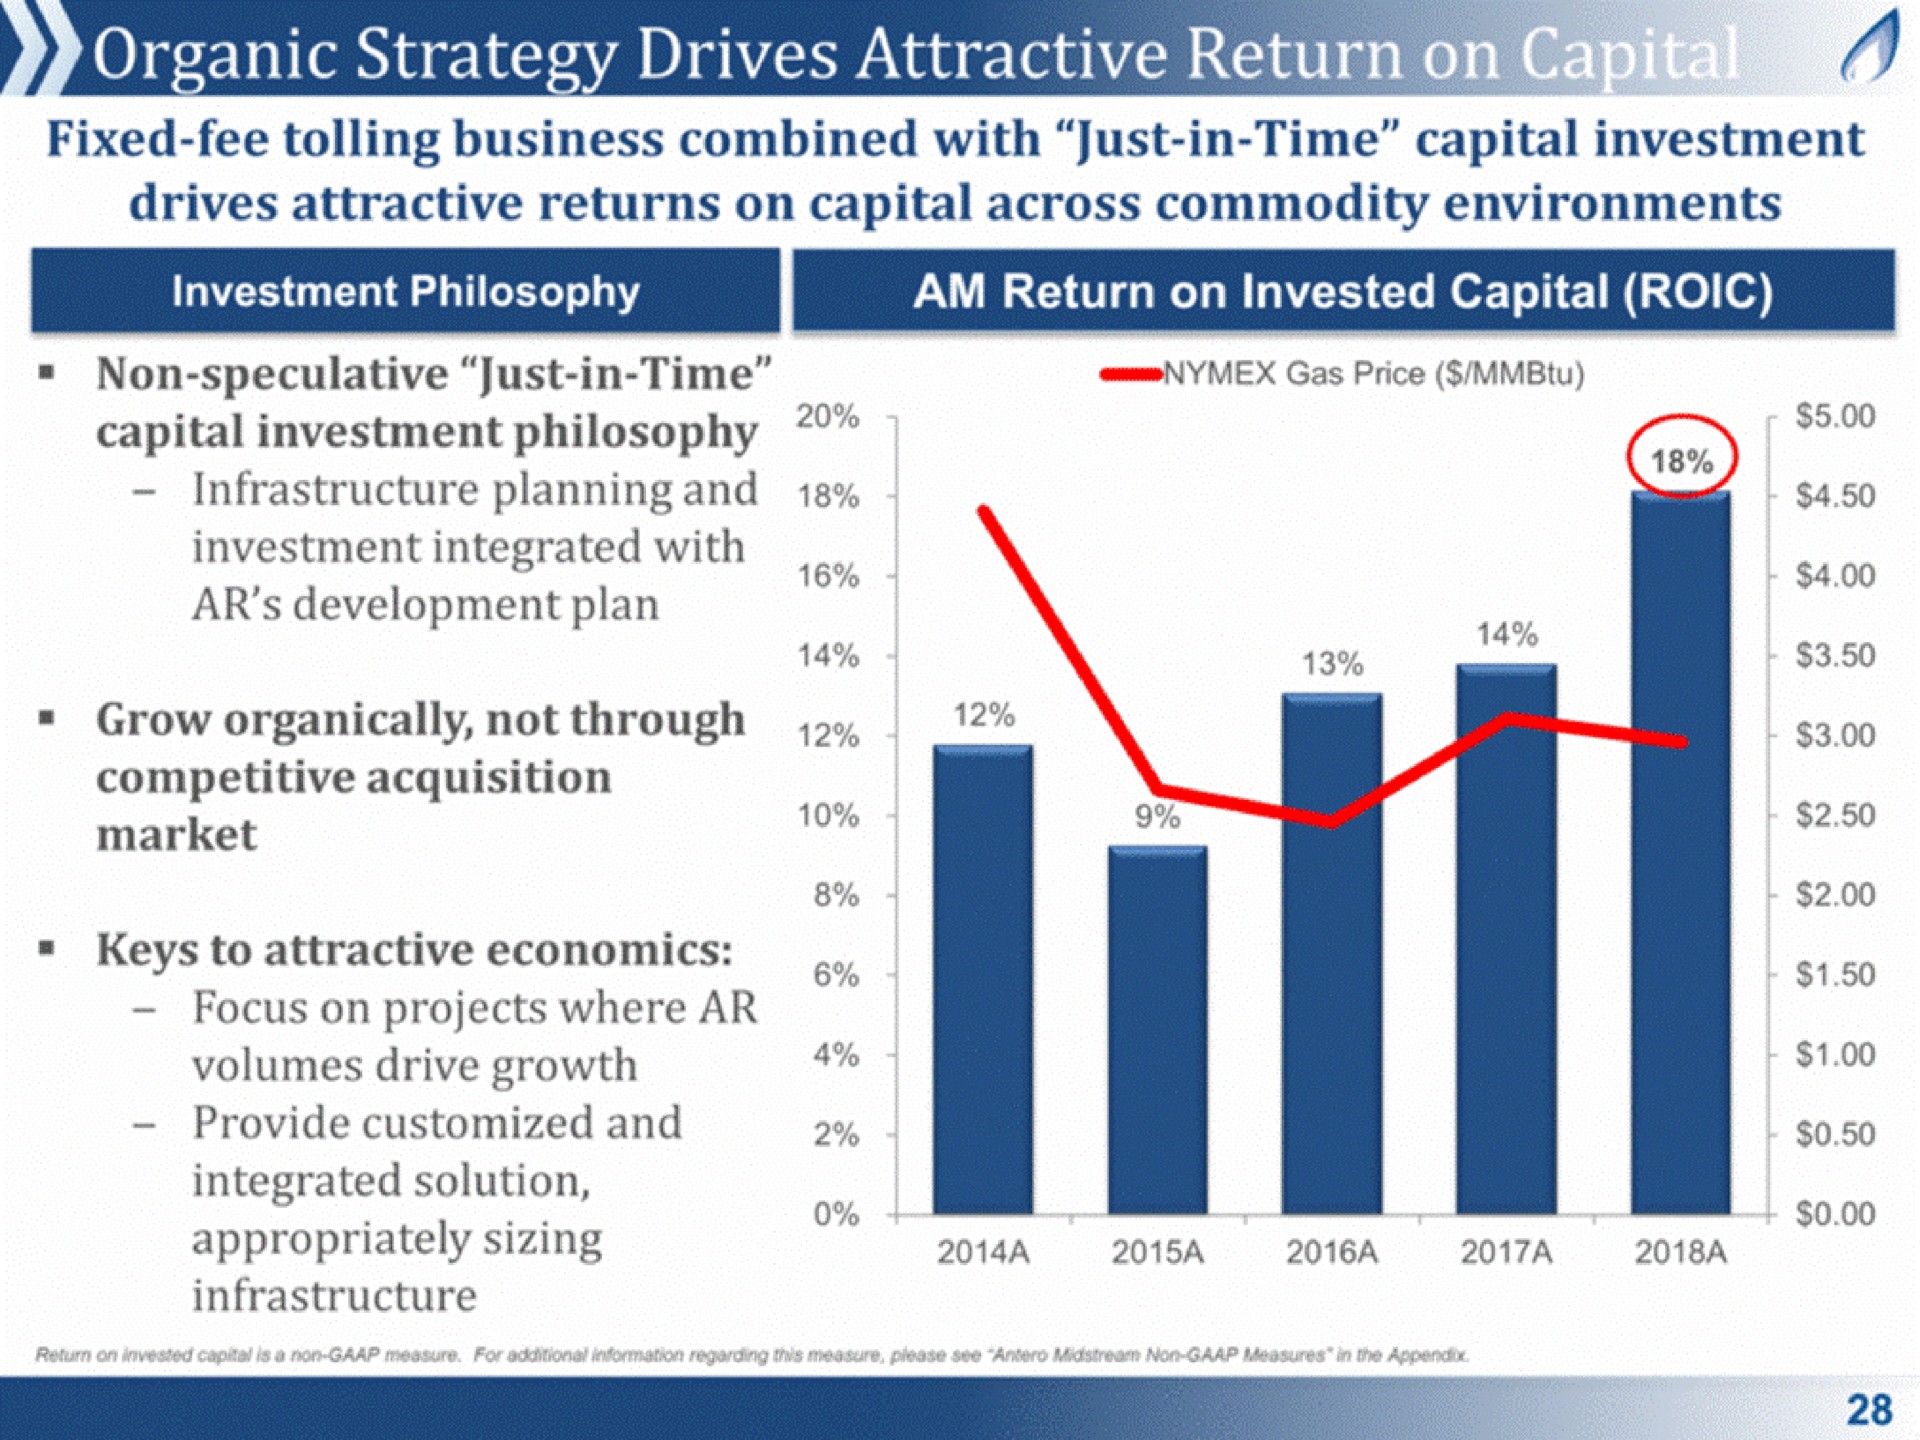 am are return a capital investment philosophy | Antero Midstream Partners